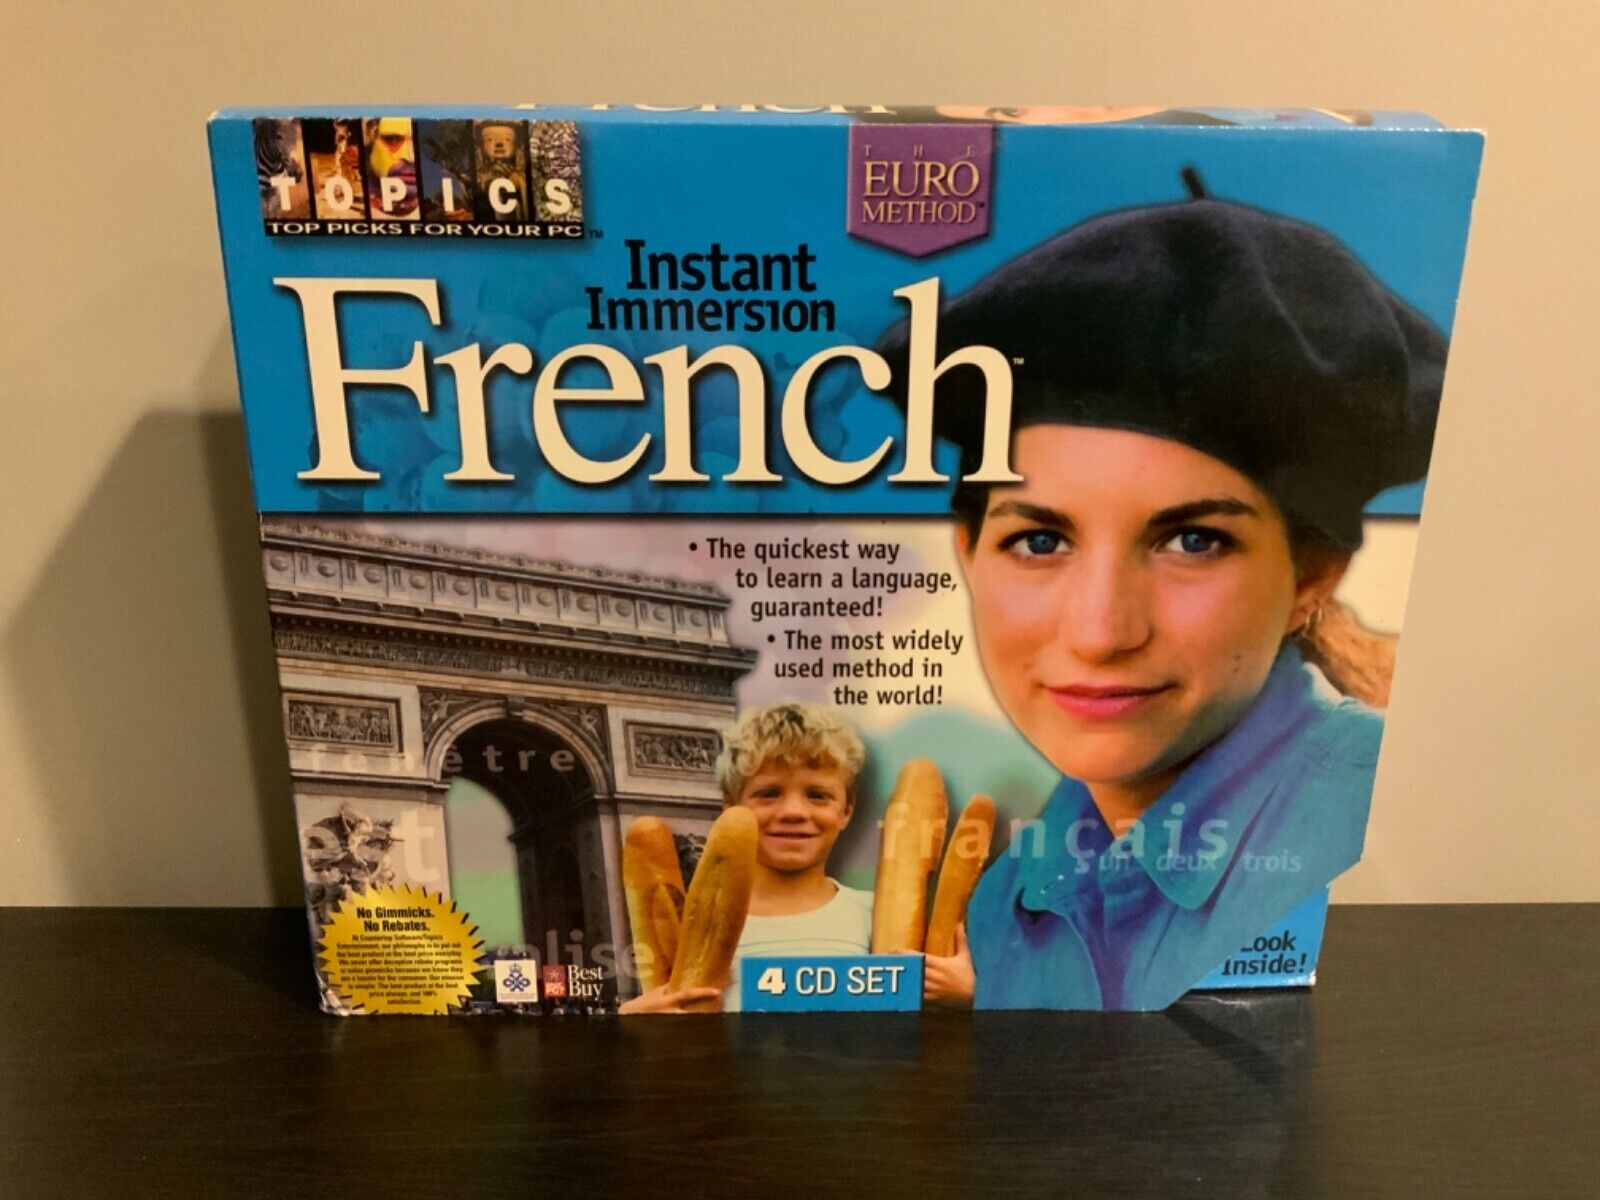 The Euro Method, Instant Immersion French, Quickest Way to Learn, New in Box